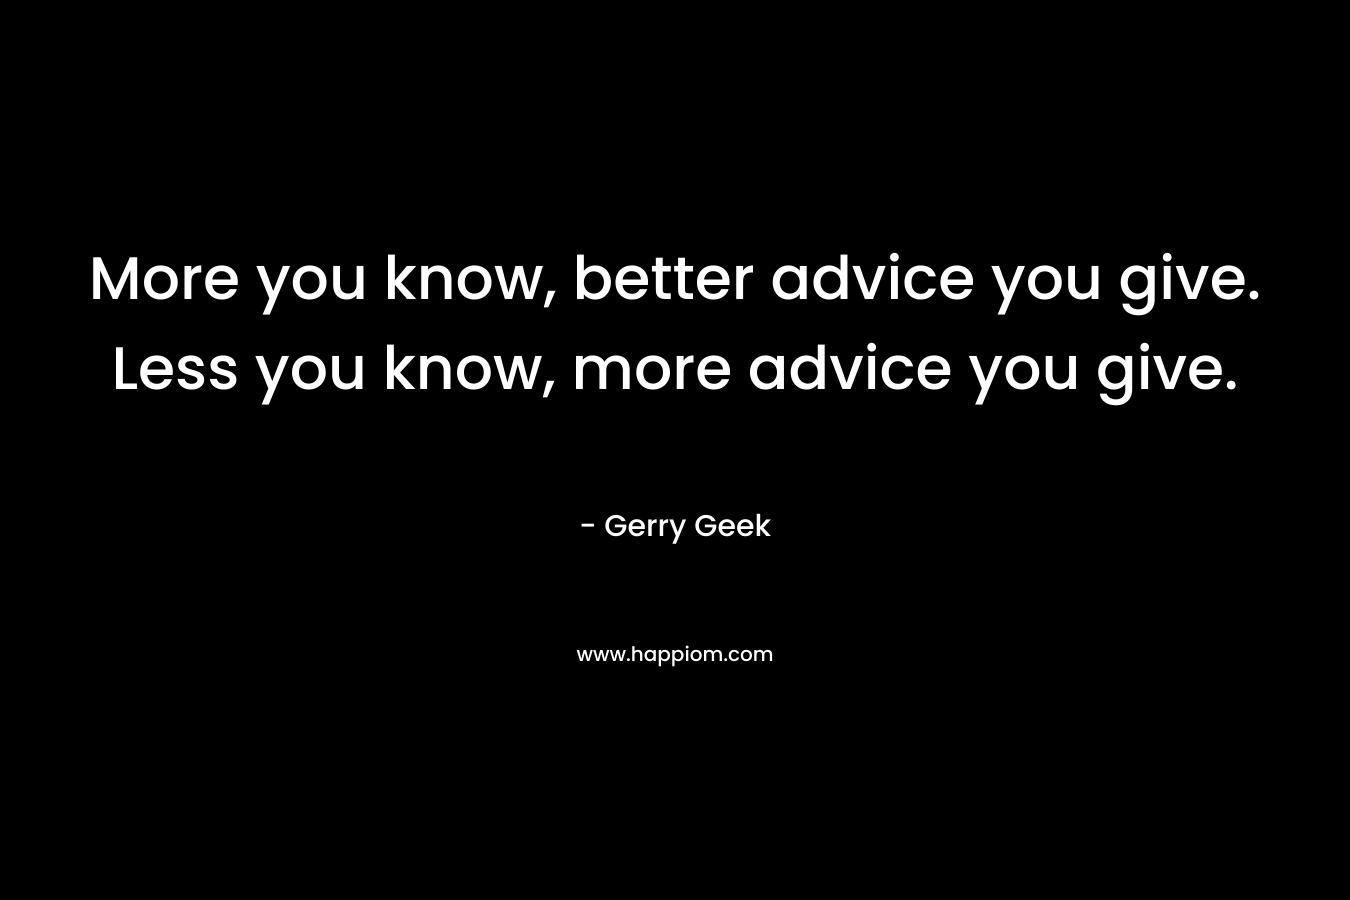 More you know, better advice you give. Less you know, more advice you give.